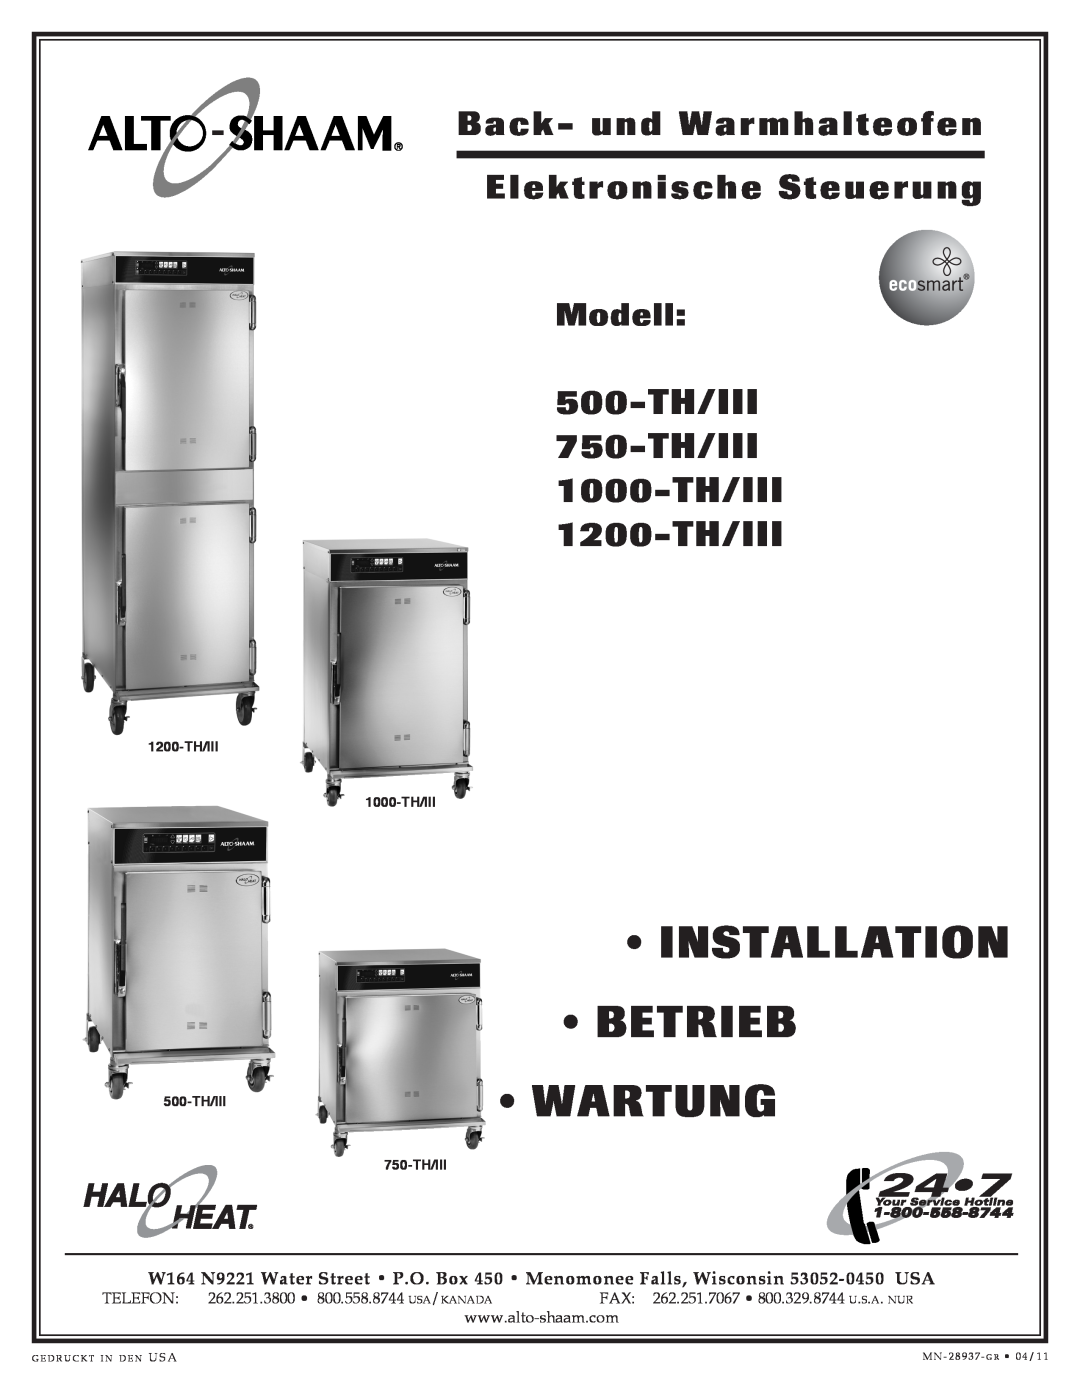 Alto-Shaam 500-TH/III manual Installation, Operation, Maintenance, Cooking & Holding Oven, Electronic Control, 750-TH/III 